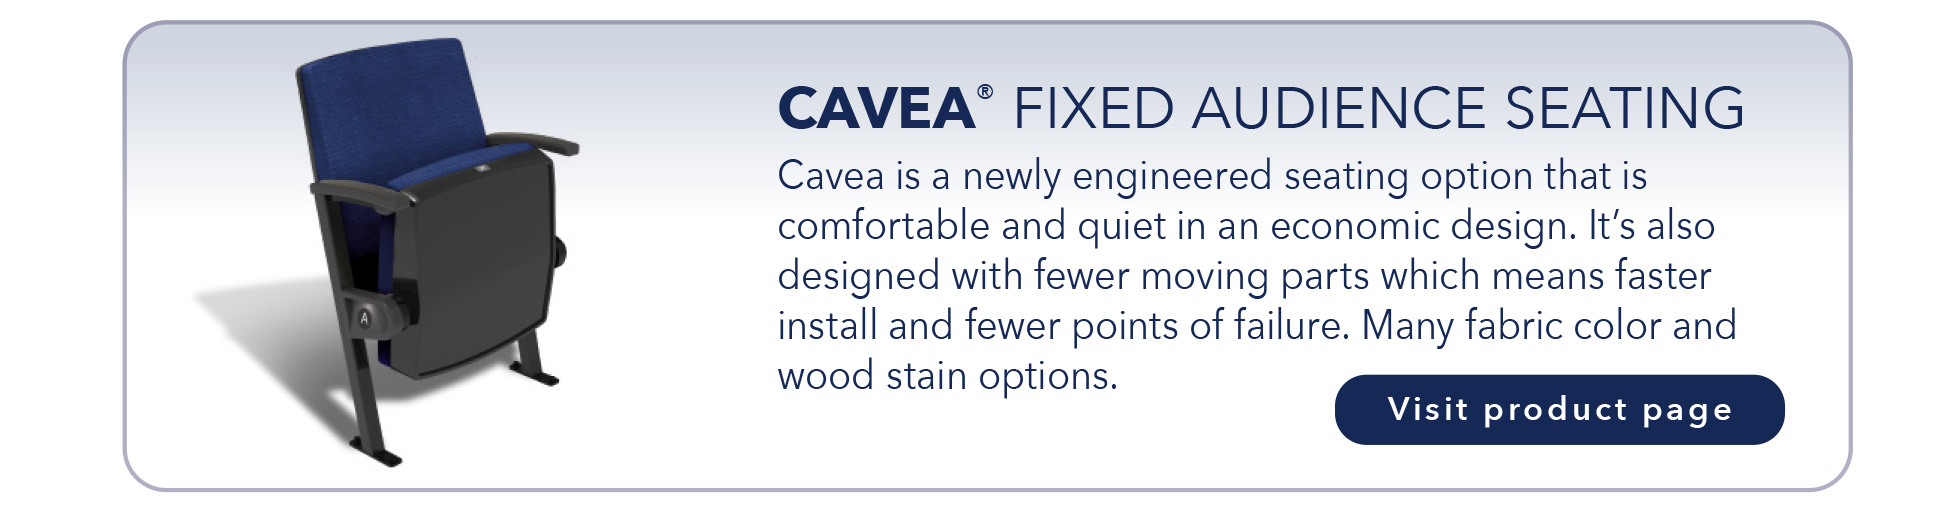 CAVEA® FIXED AUDIENCE SEATING
Cavea is a newly engineered seating option that is
comfortable and quiet in an economic design. It’s also
designed with fewer moving parts which means faster
install and fewer points of failure. Many fabric color and
wood stain options.